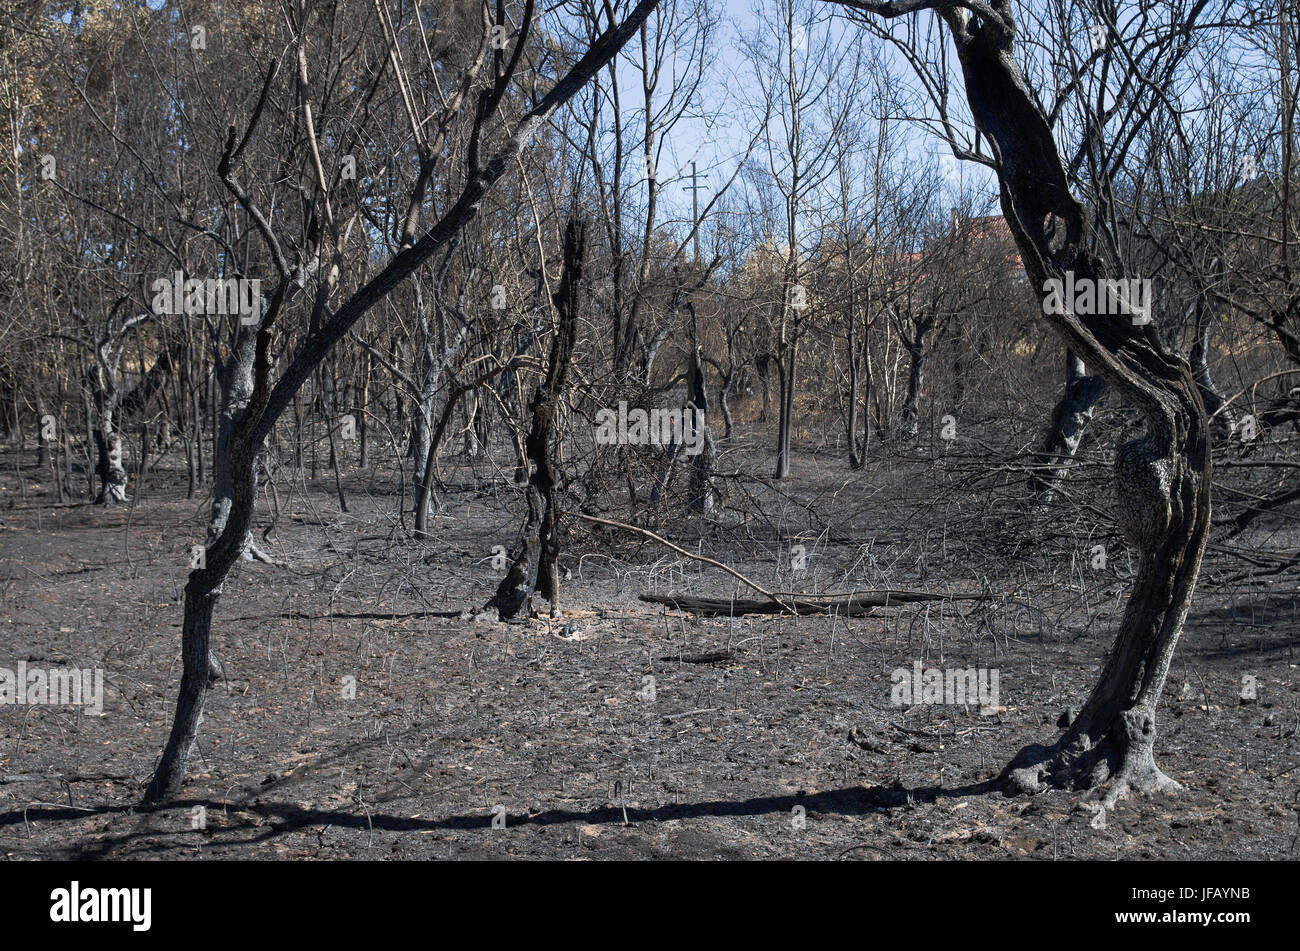 A field of olive trees, next to the forest, was burnt to the ground on account of a massive forest fire at Pedrogao Grande municipality. Portugal. Stock Photo